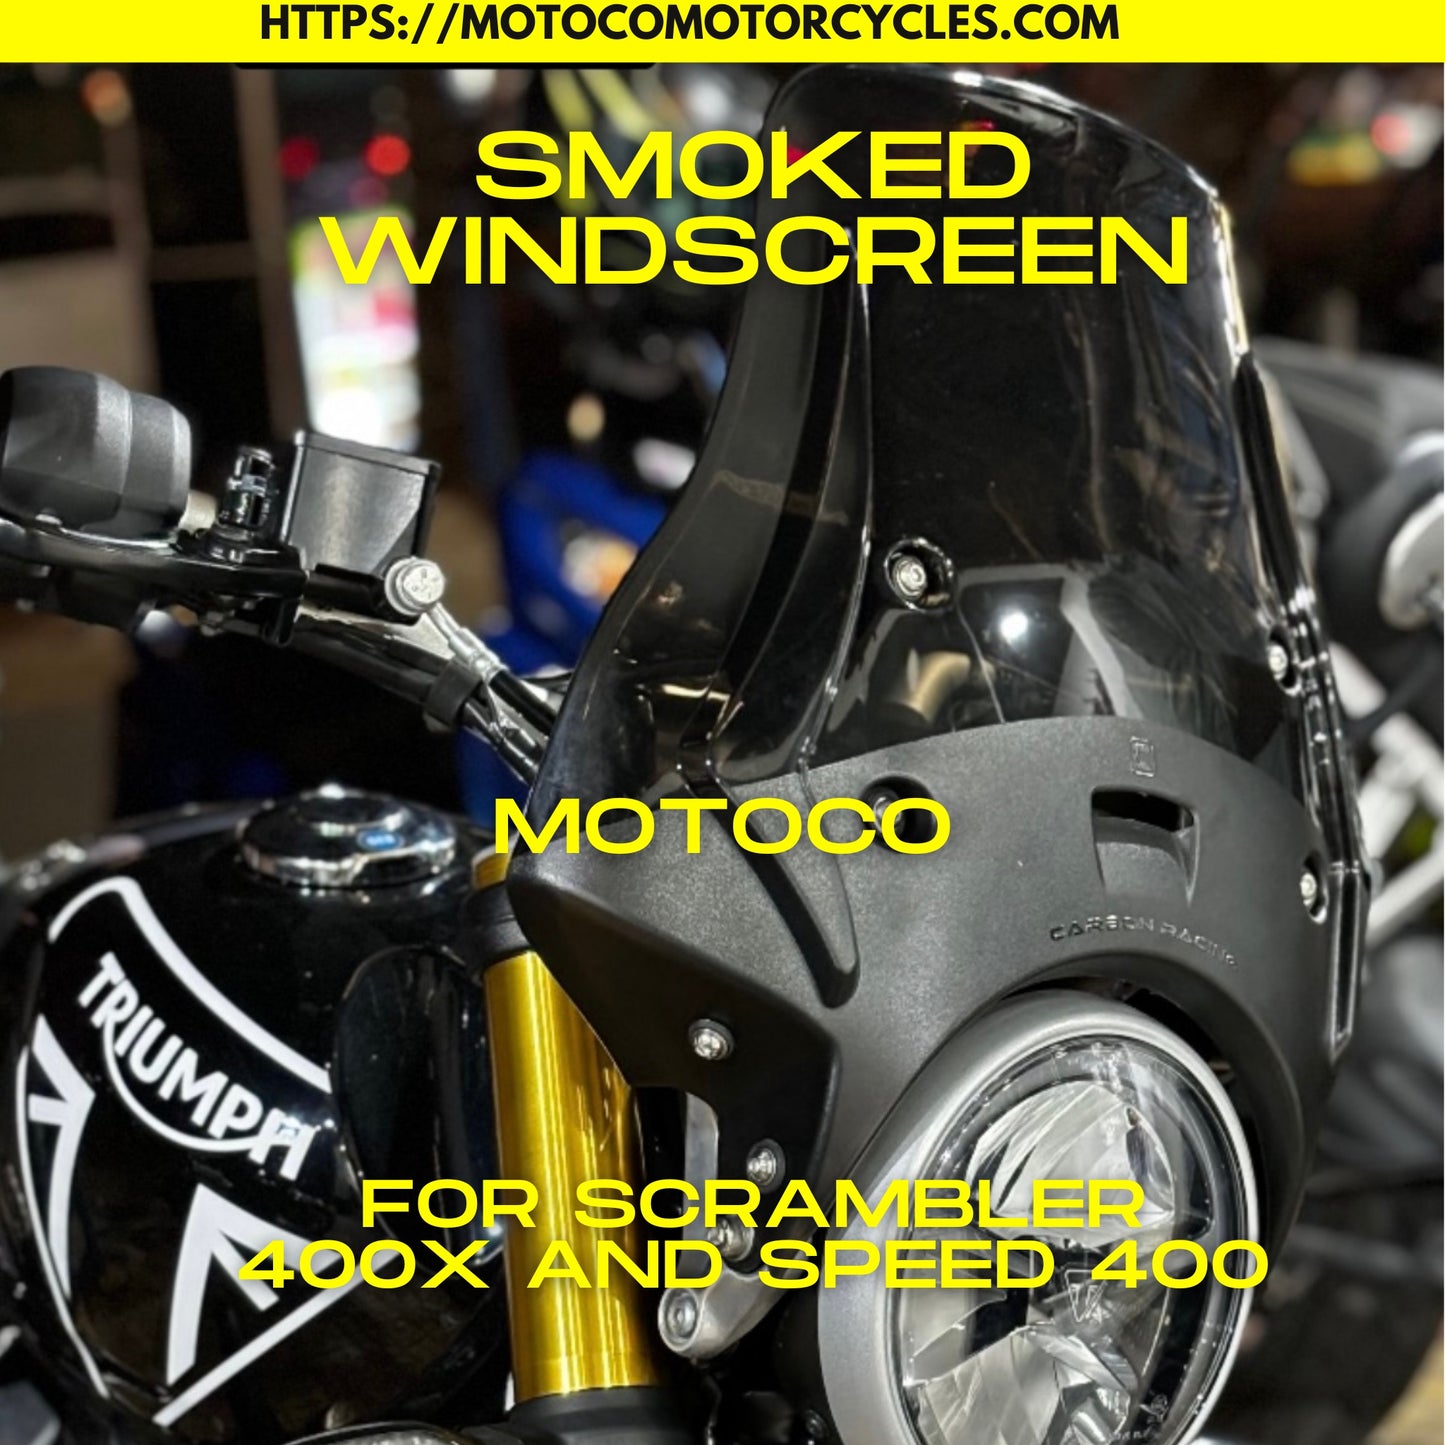 Smoked Windscreen For Triumph Speed 400 and Scrambler 400x